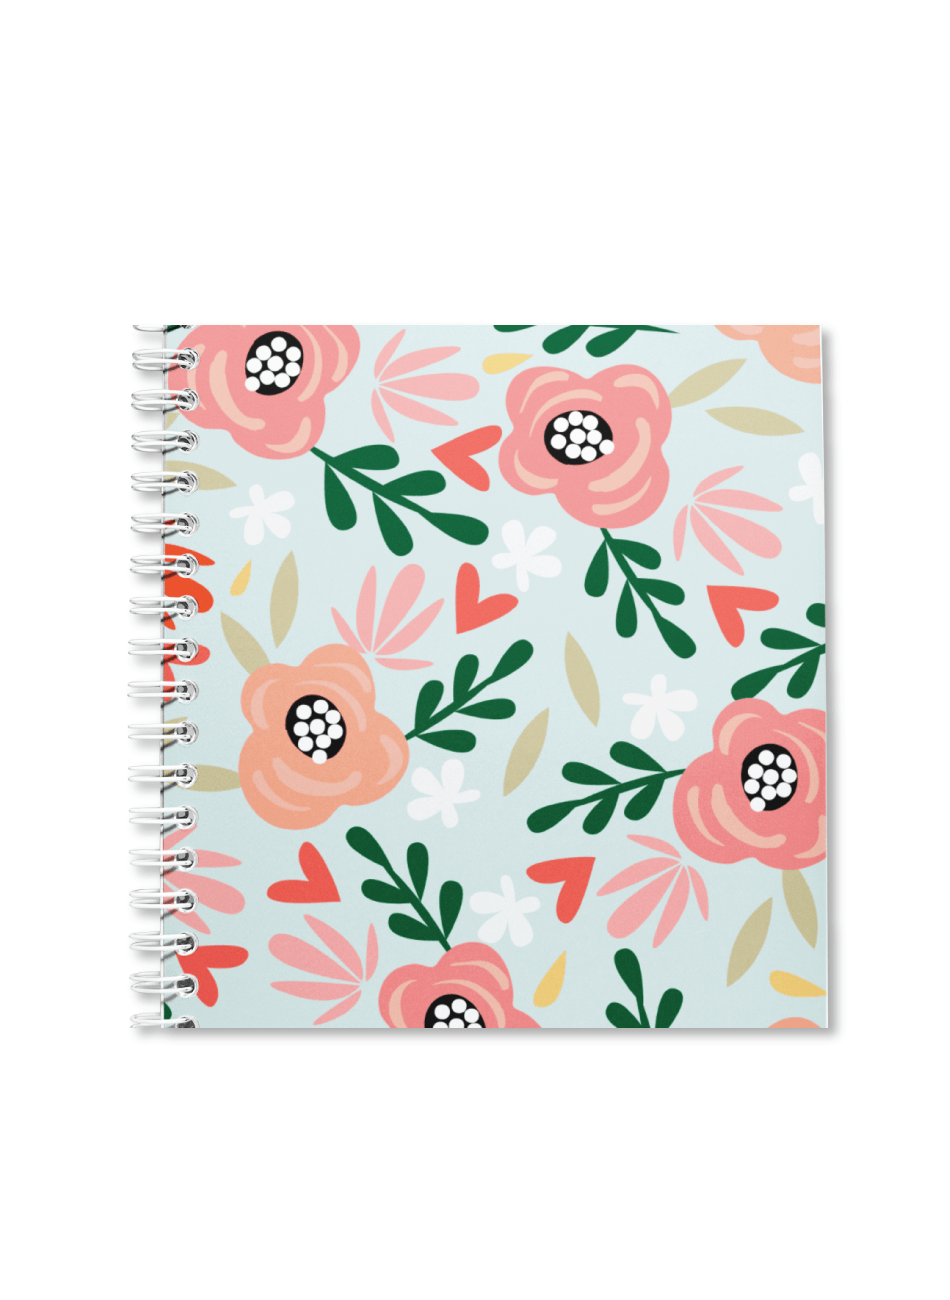 Floral Notebook | Available in various sizes